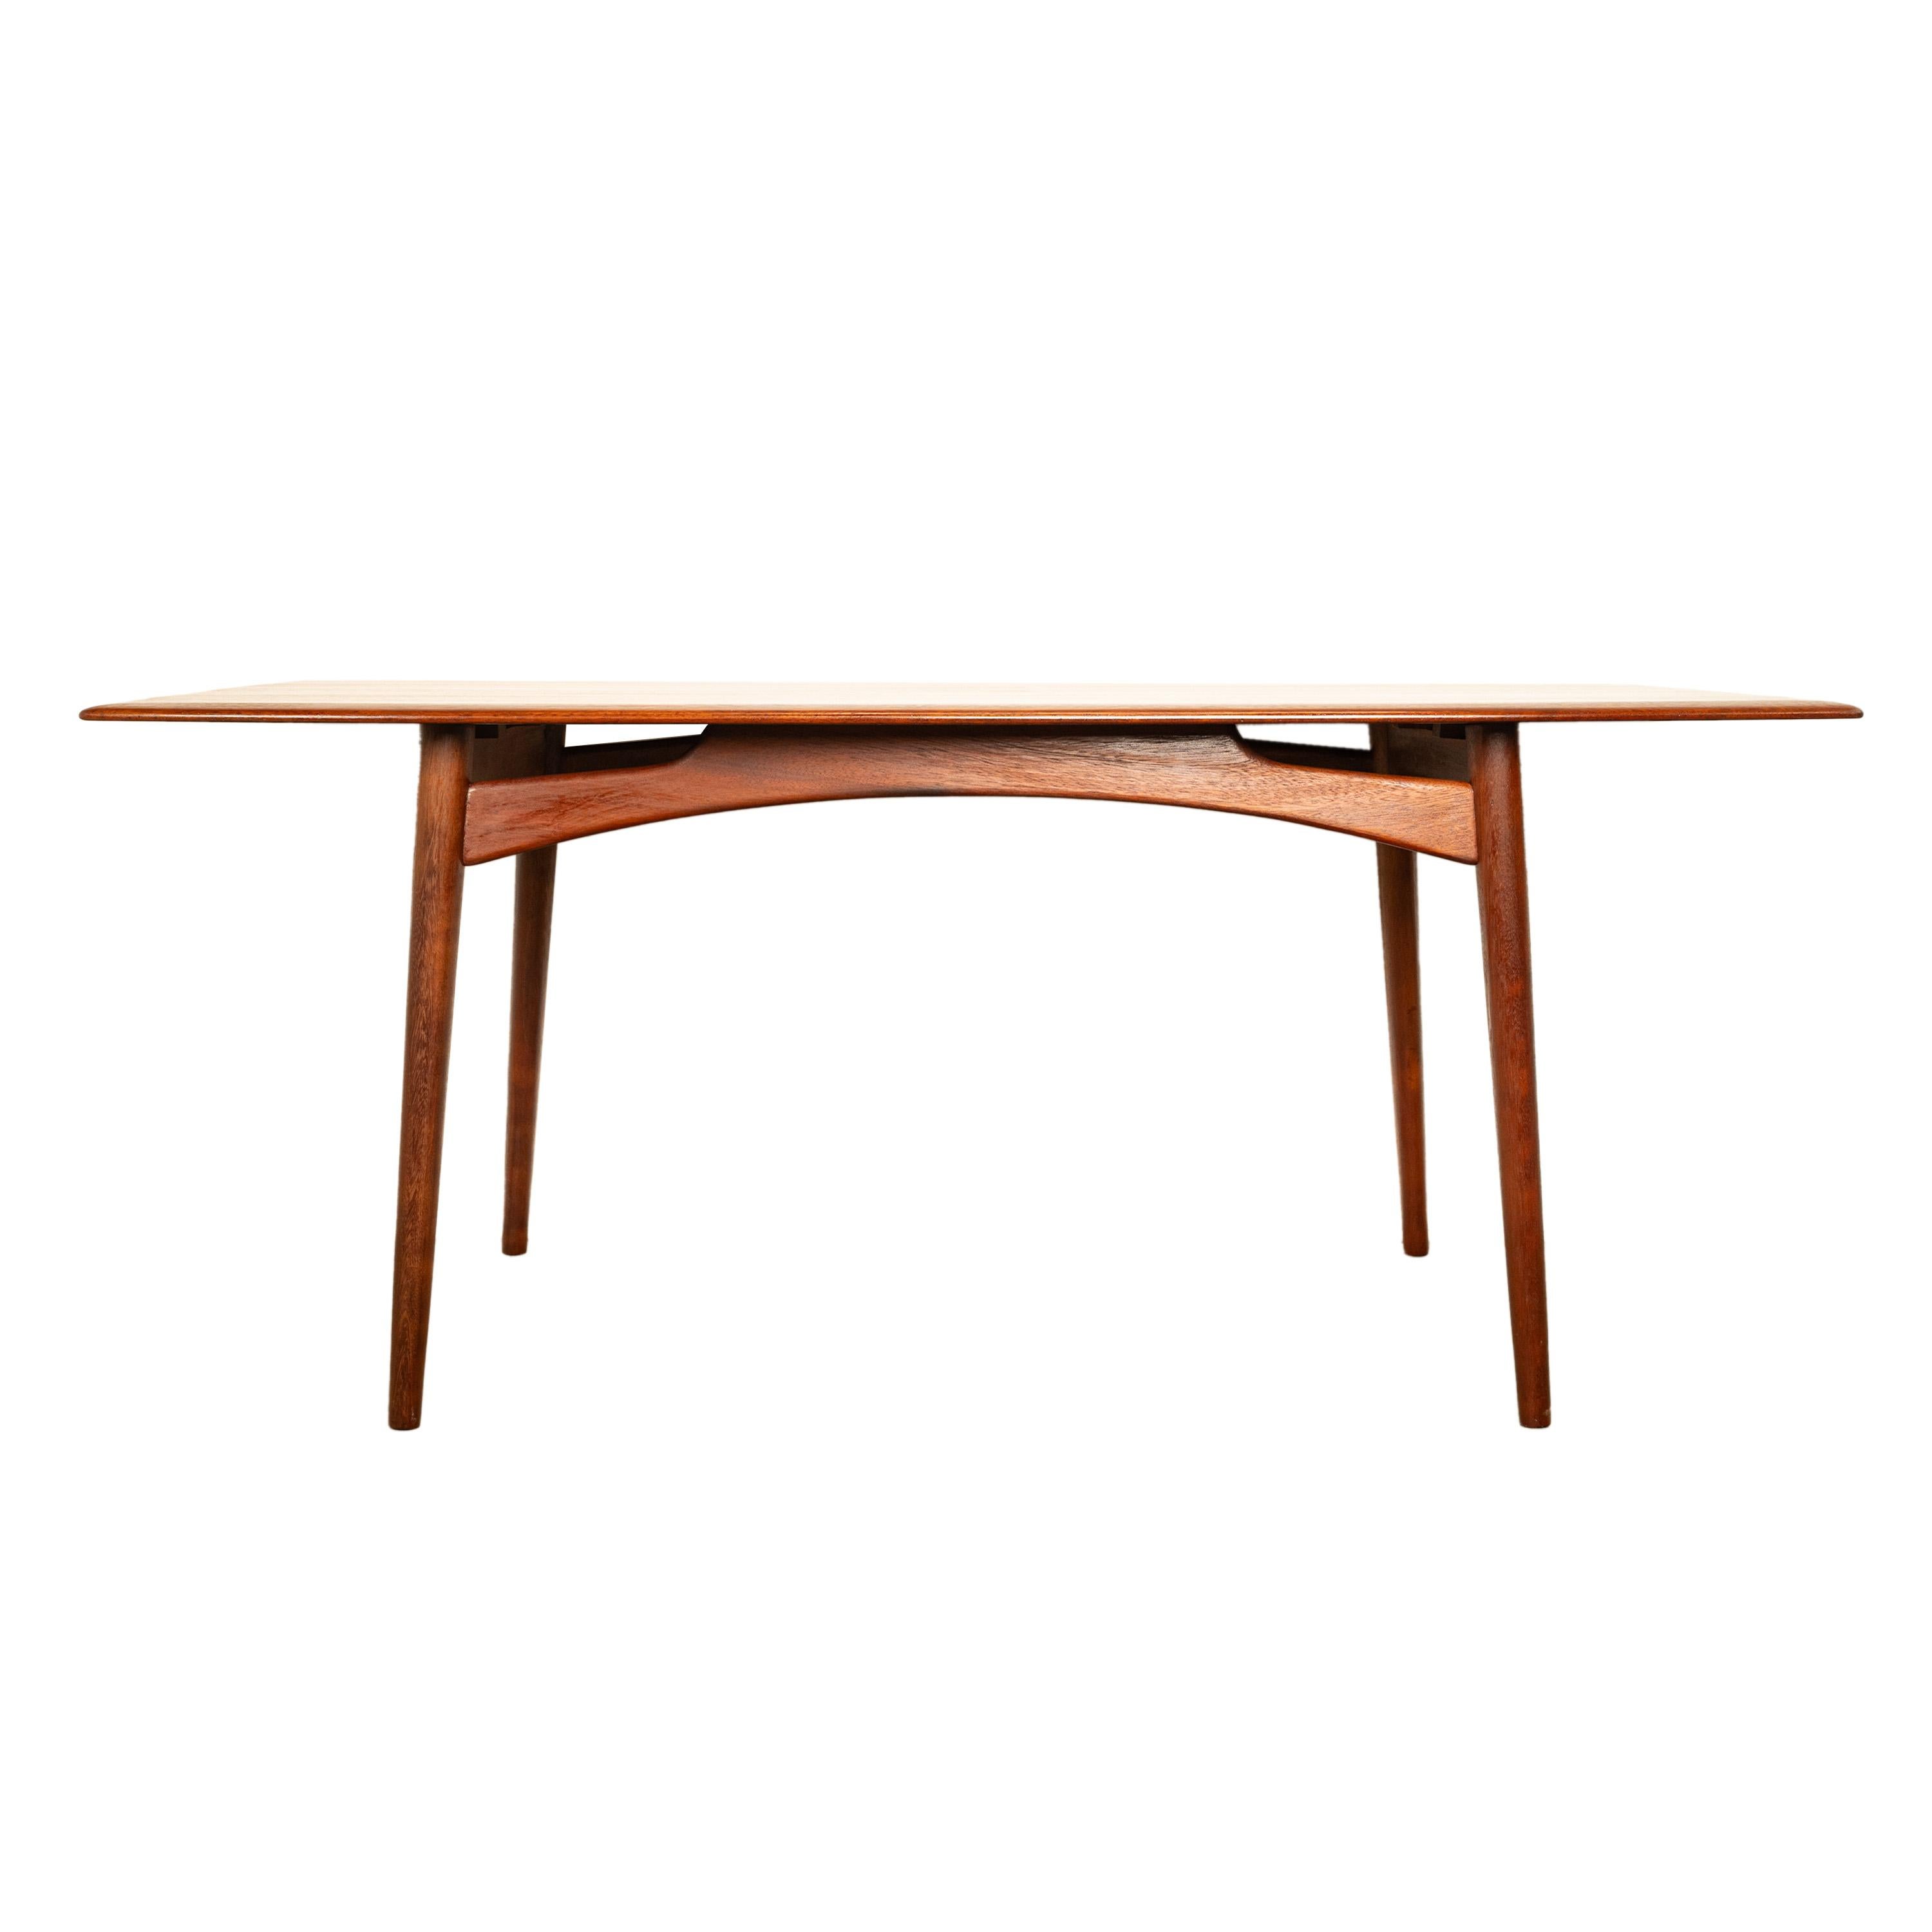 English Mid Century Modern Danish Style Solid Teak Afromosia 8 Seat Dining Table 1960 For Sale